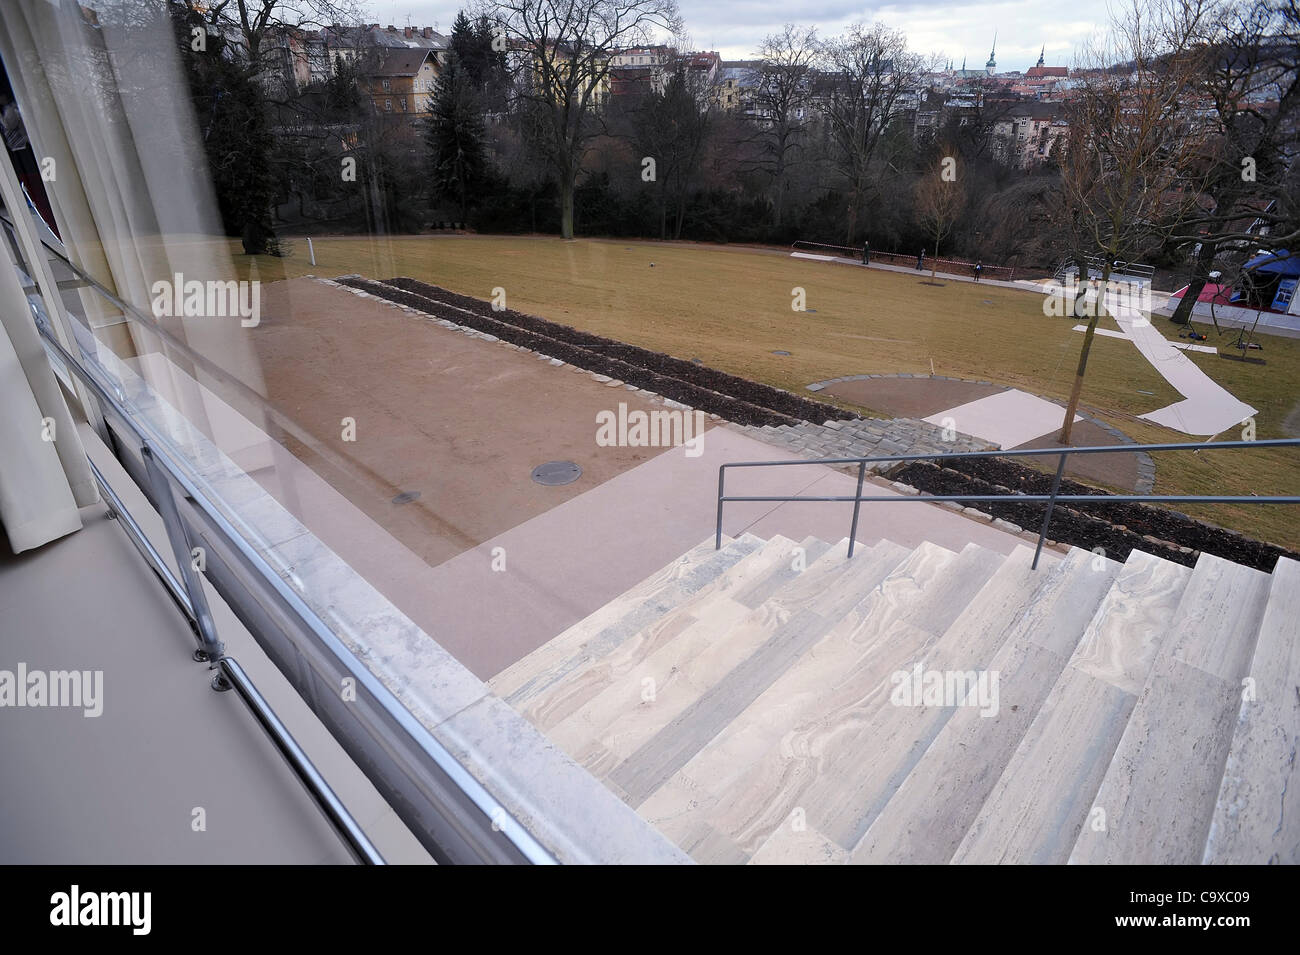 Brno, Czech Republic. Feb 29, 2012.  Villa Tugendhat, one of the world's most famous buildings, reopens after a multi-million pound restoration project. Designed by Ludwig Mies van der Rohe, the building is regarded as an icon of modernism. Credit: Igor Sefr/CTK/Alamy Live News Stock Photo